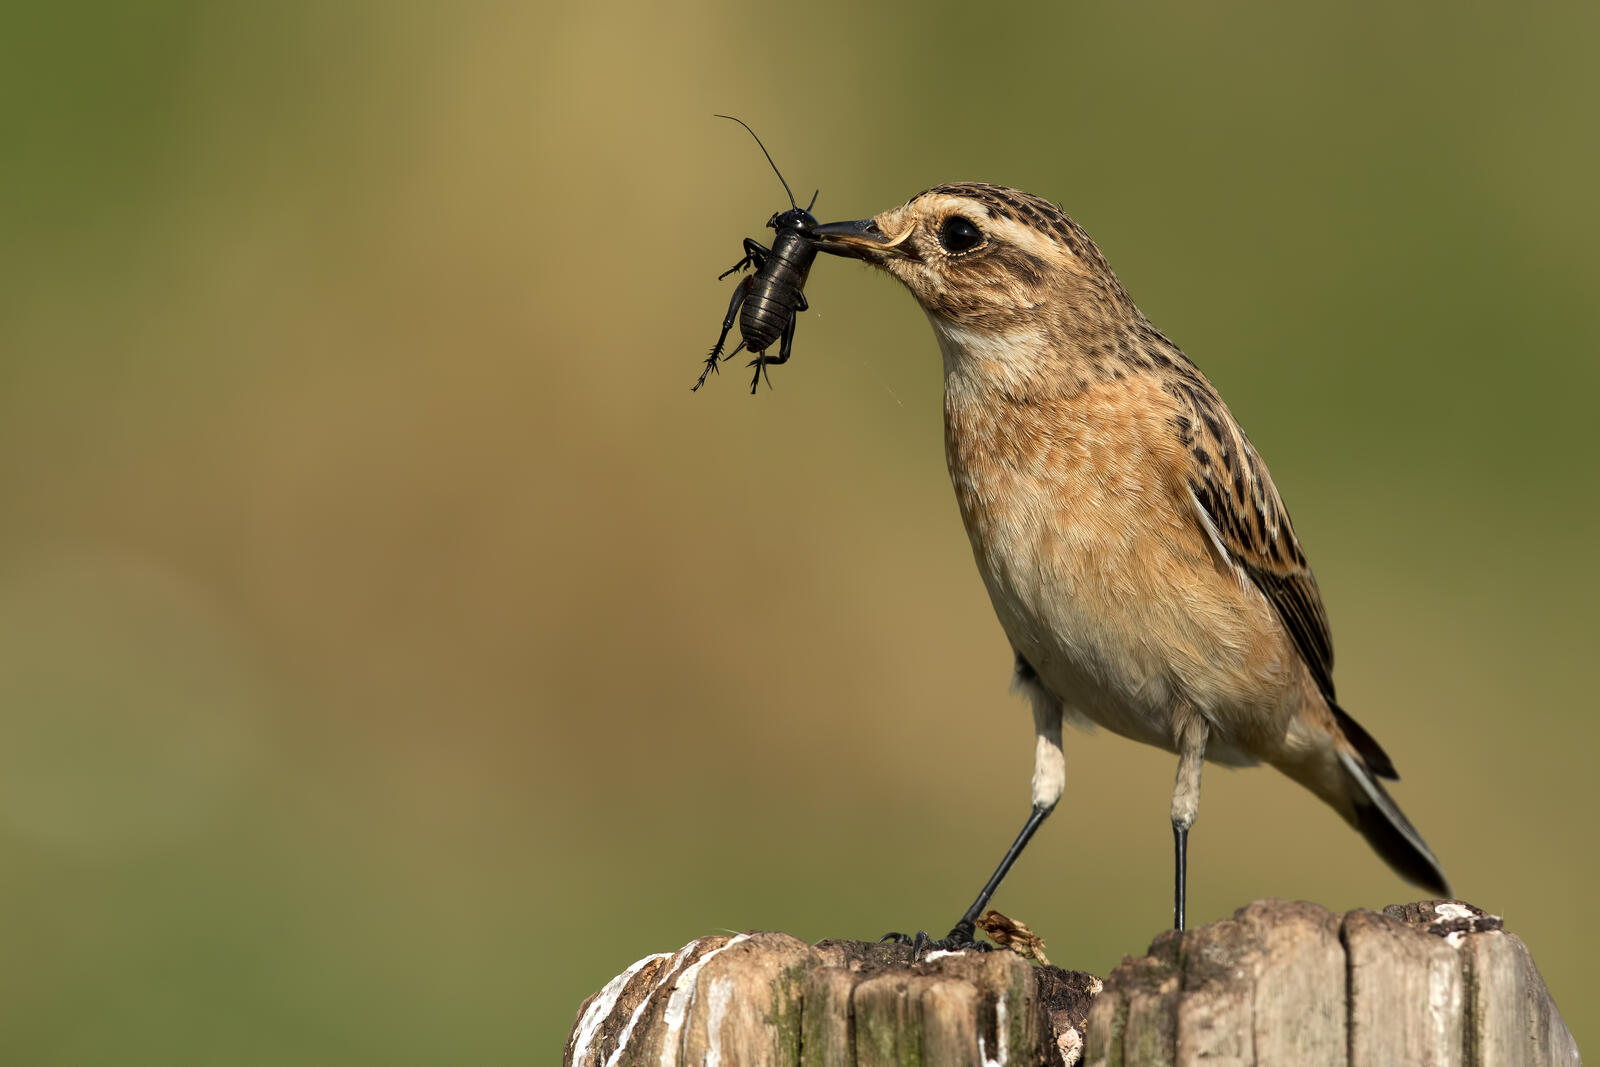 Wallpapers Warbler whinchat Stiaccino on the desktop